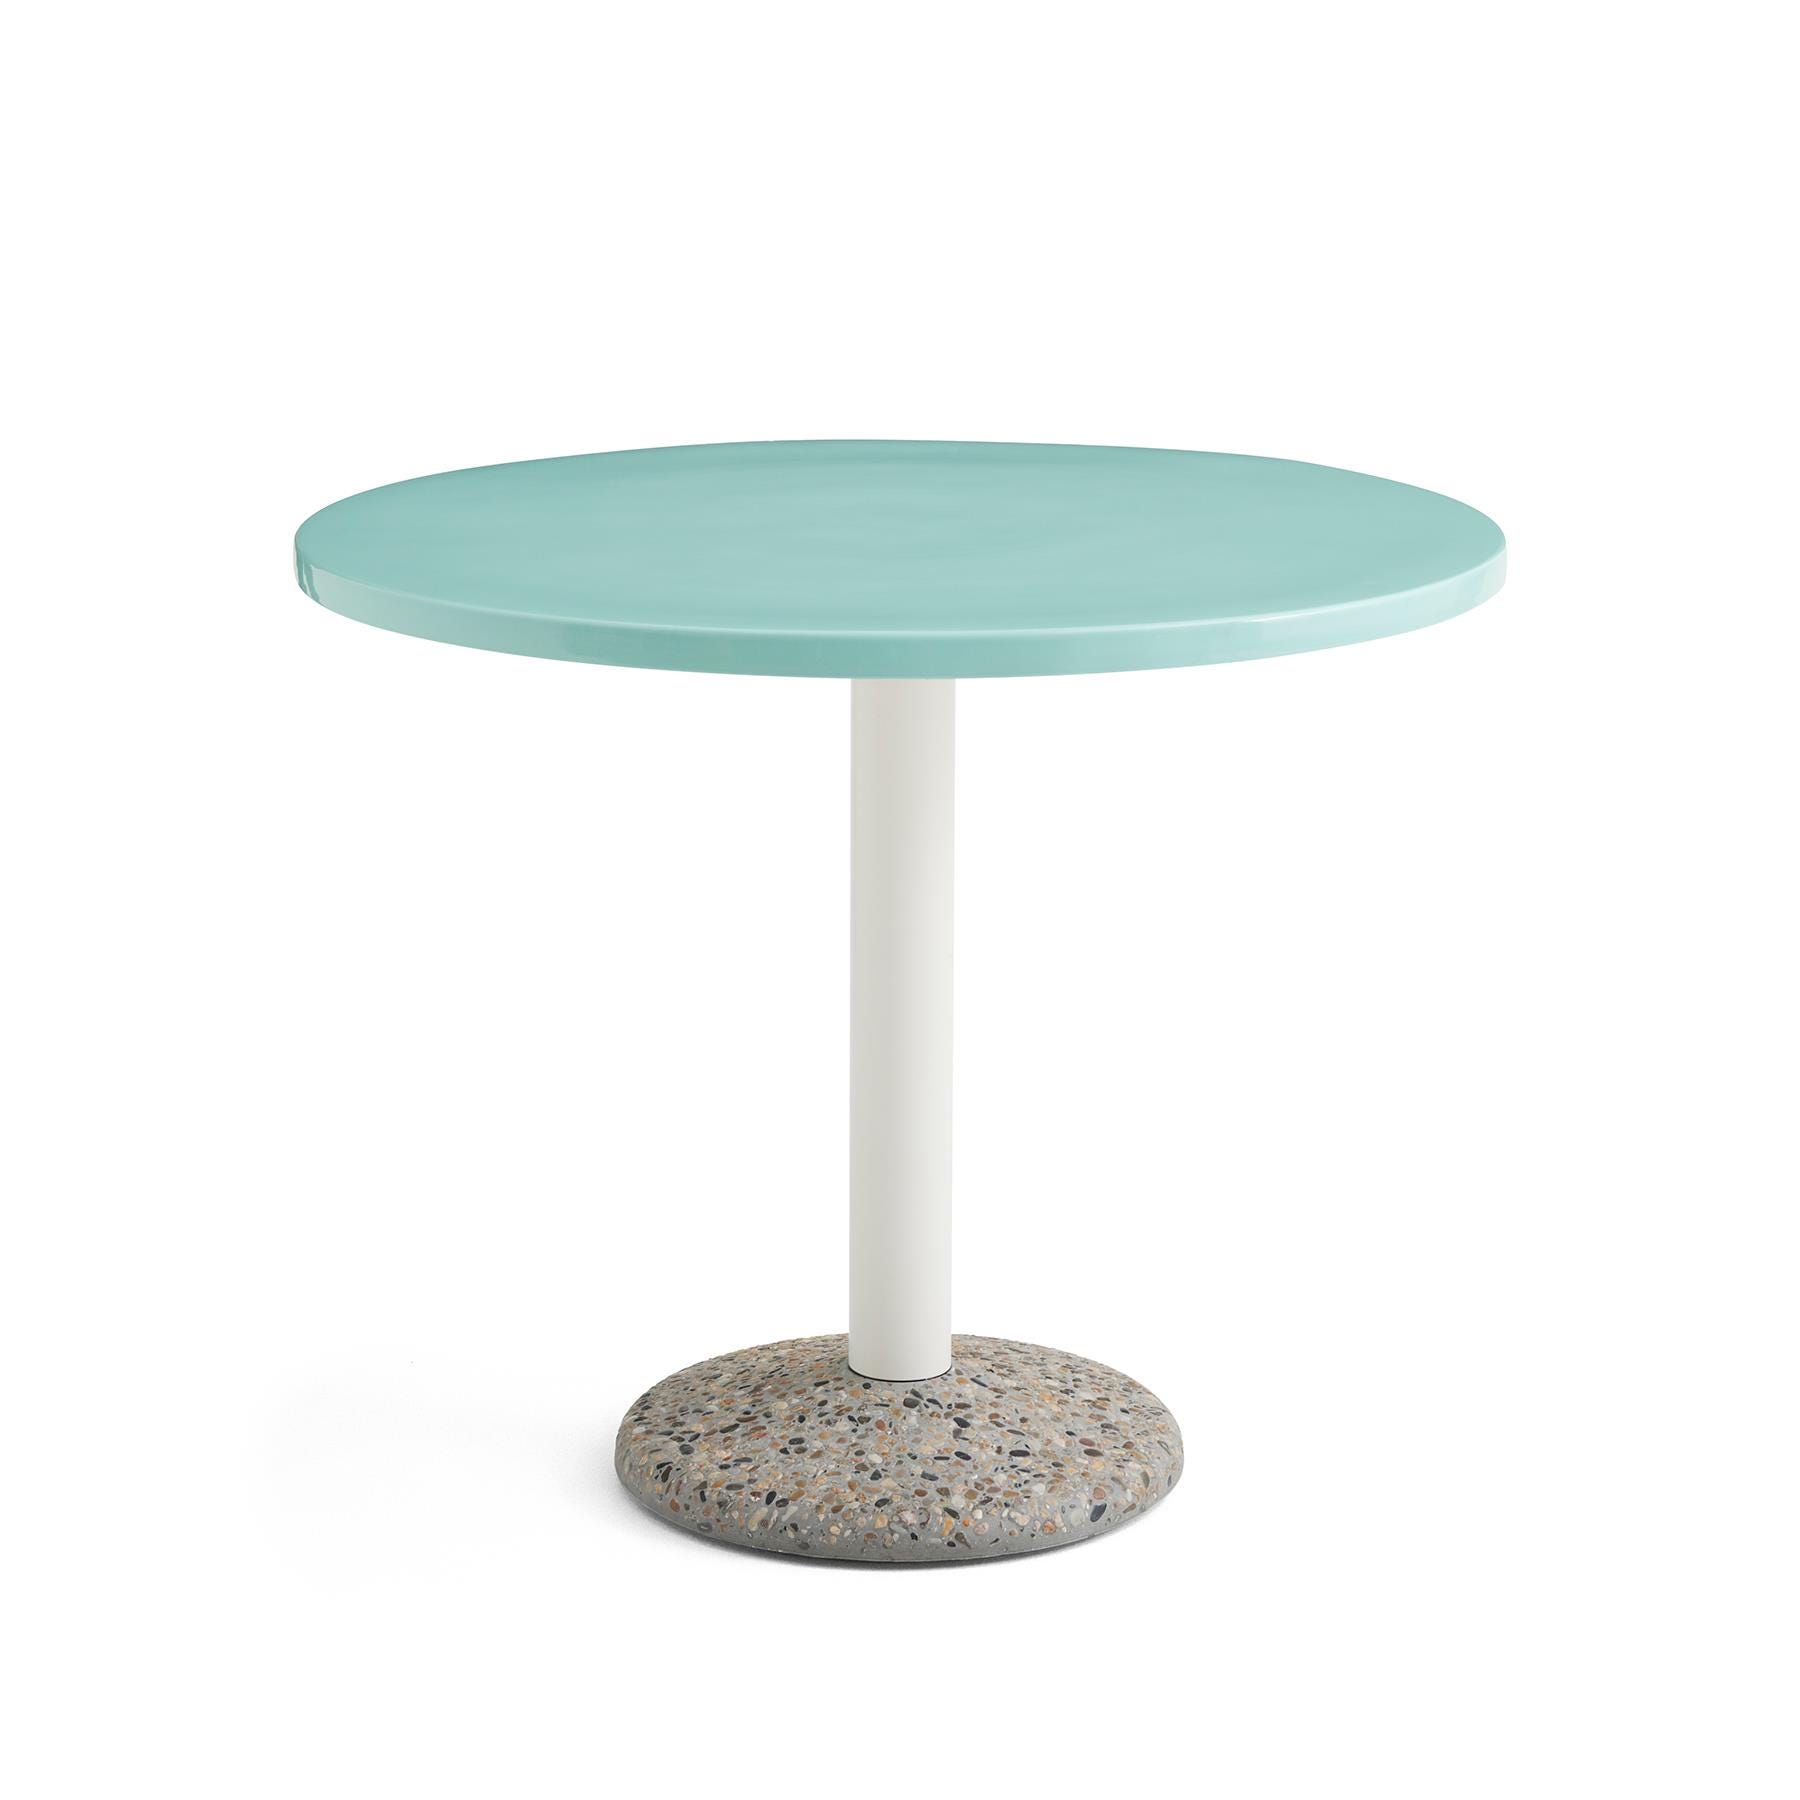 Hay Ceramic Table Large Light Mint Green Designer Furniture From Holloways Of Ludlow